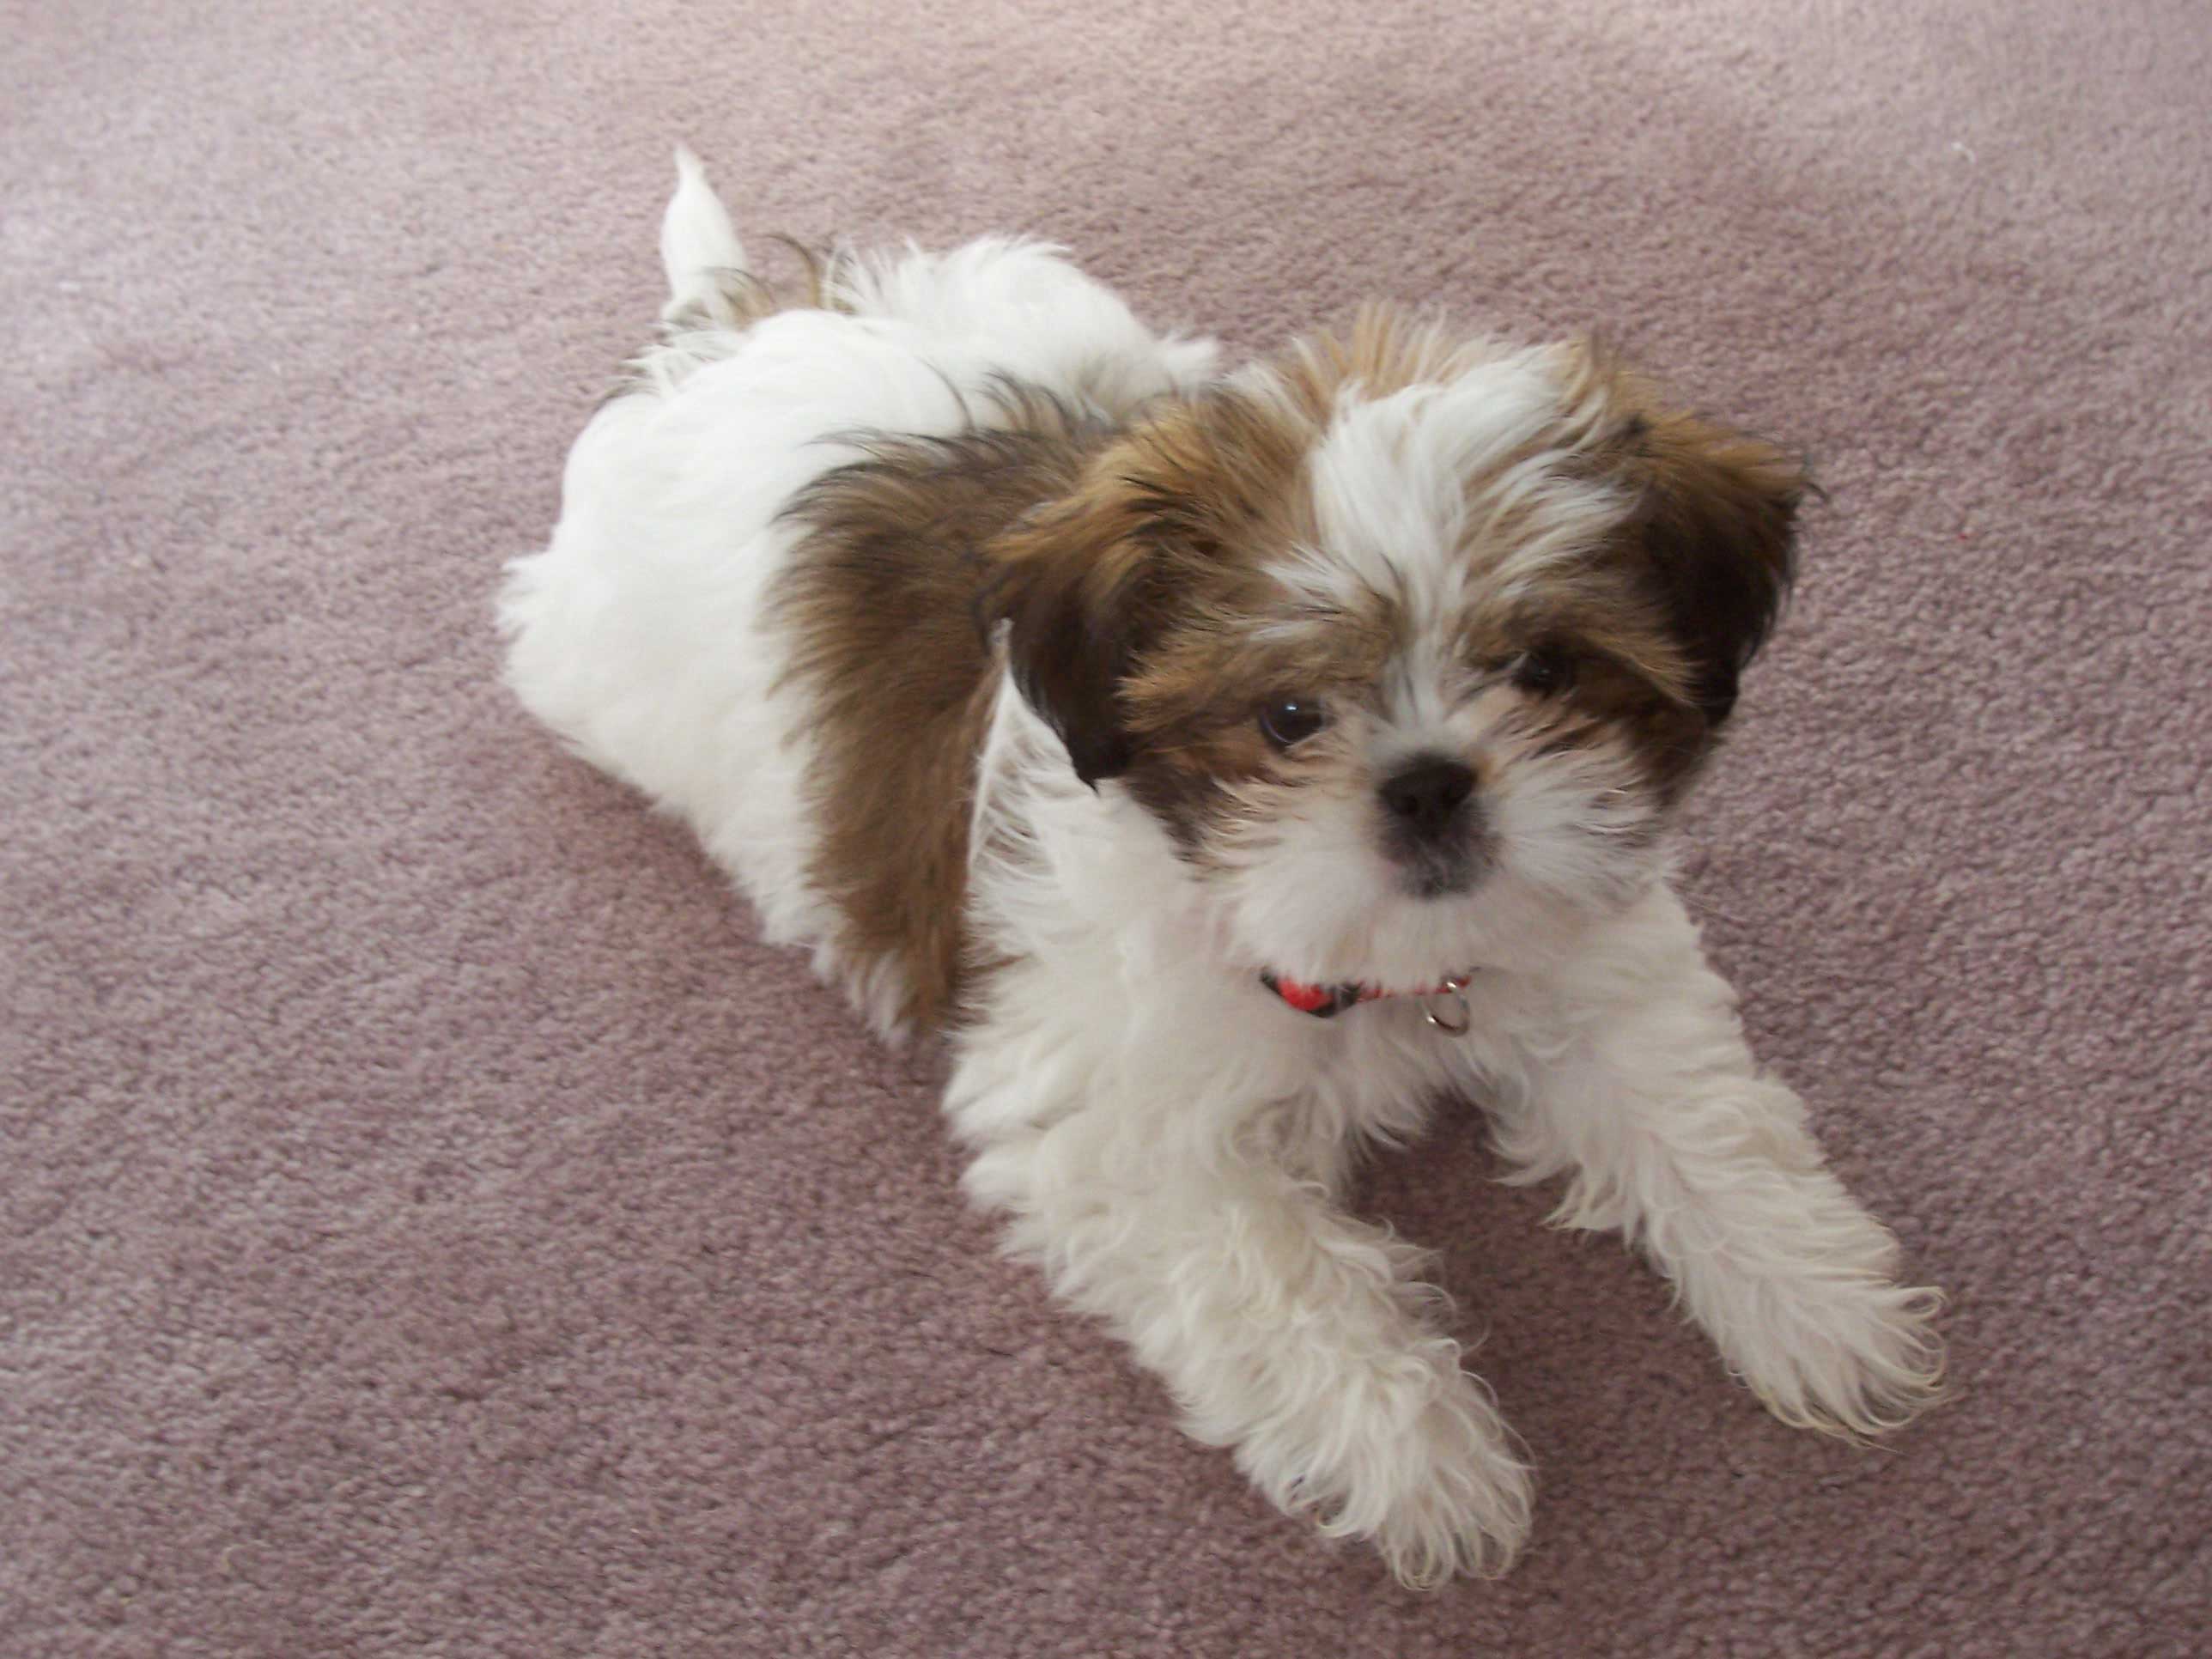 Compact, however slightly longer than it's tall, the Shih Tzu